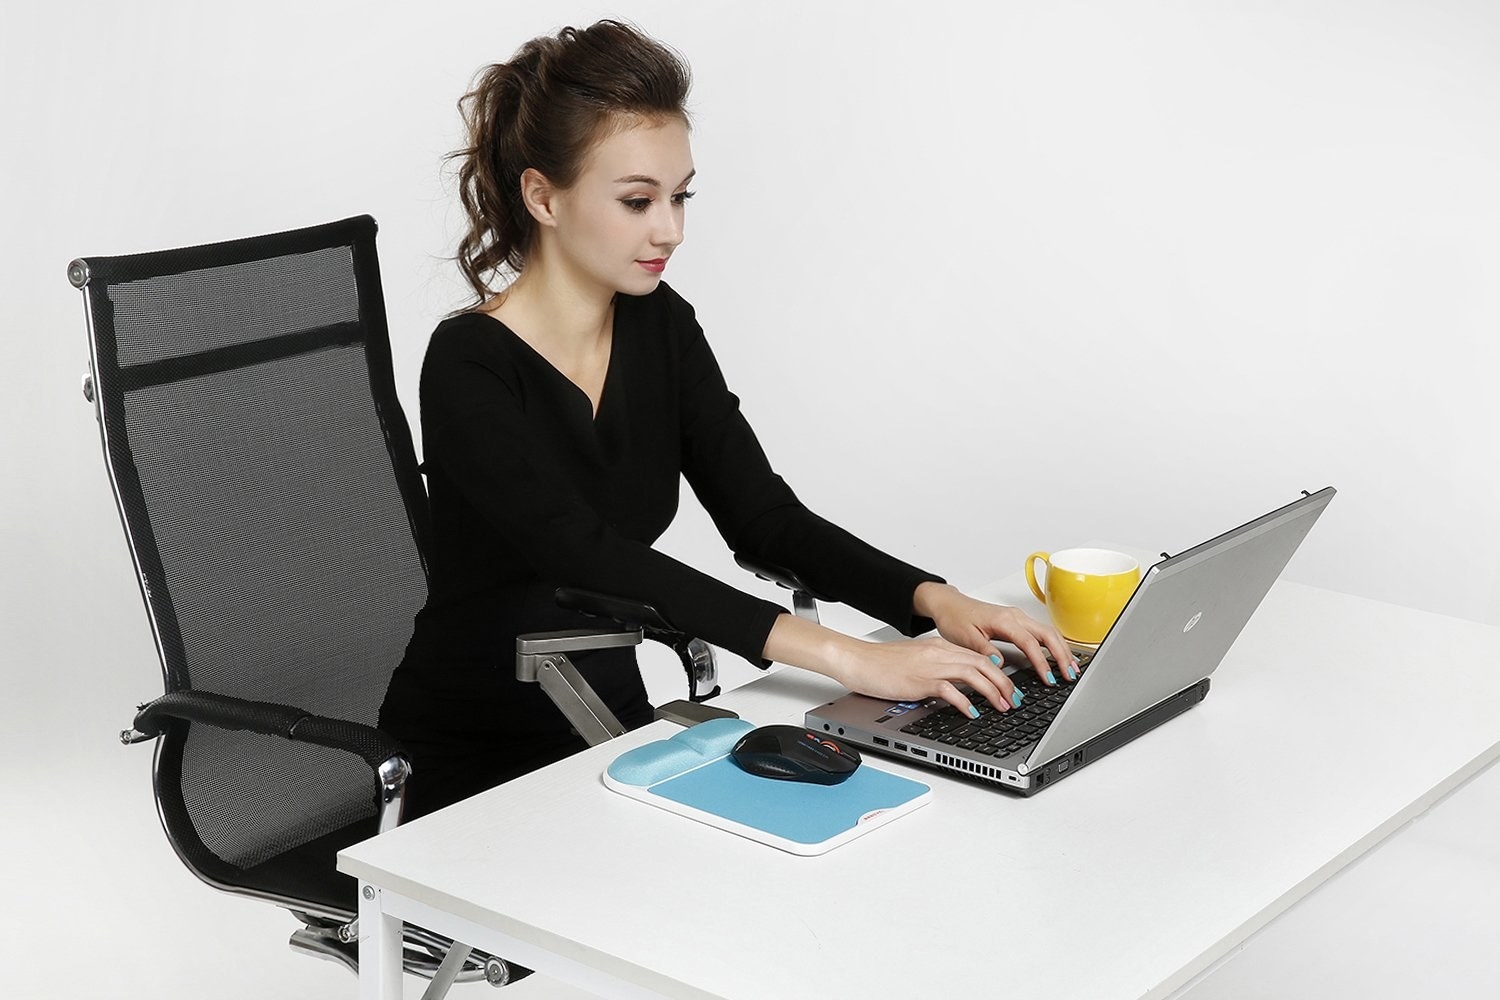 A model types on their laptop, which is sitting on a table, with their arms resting on the armrests